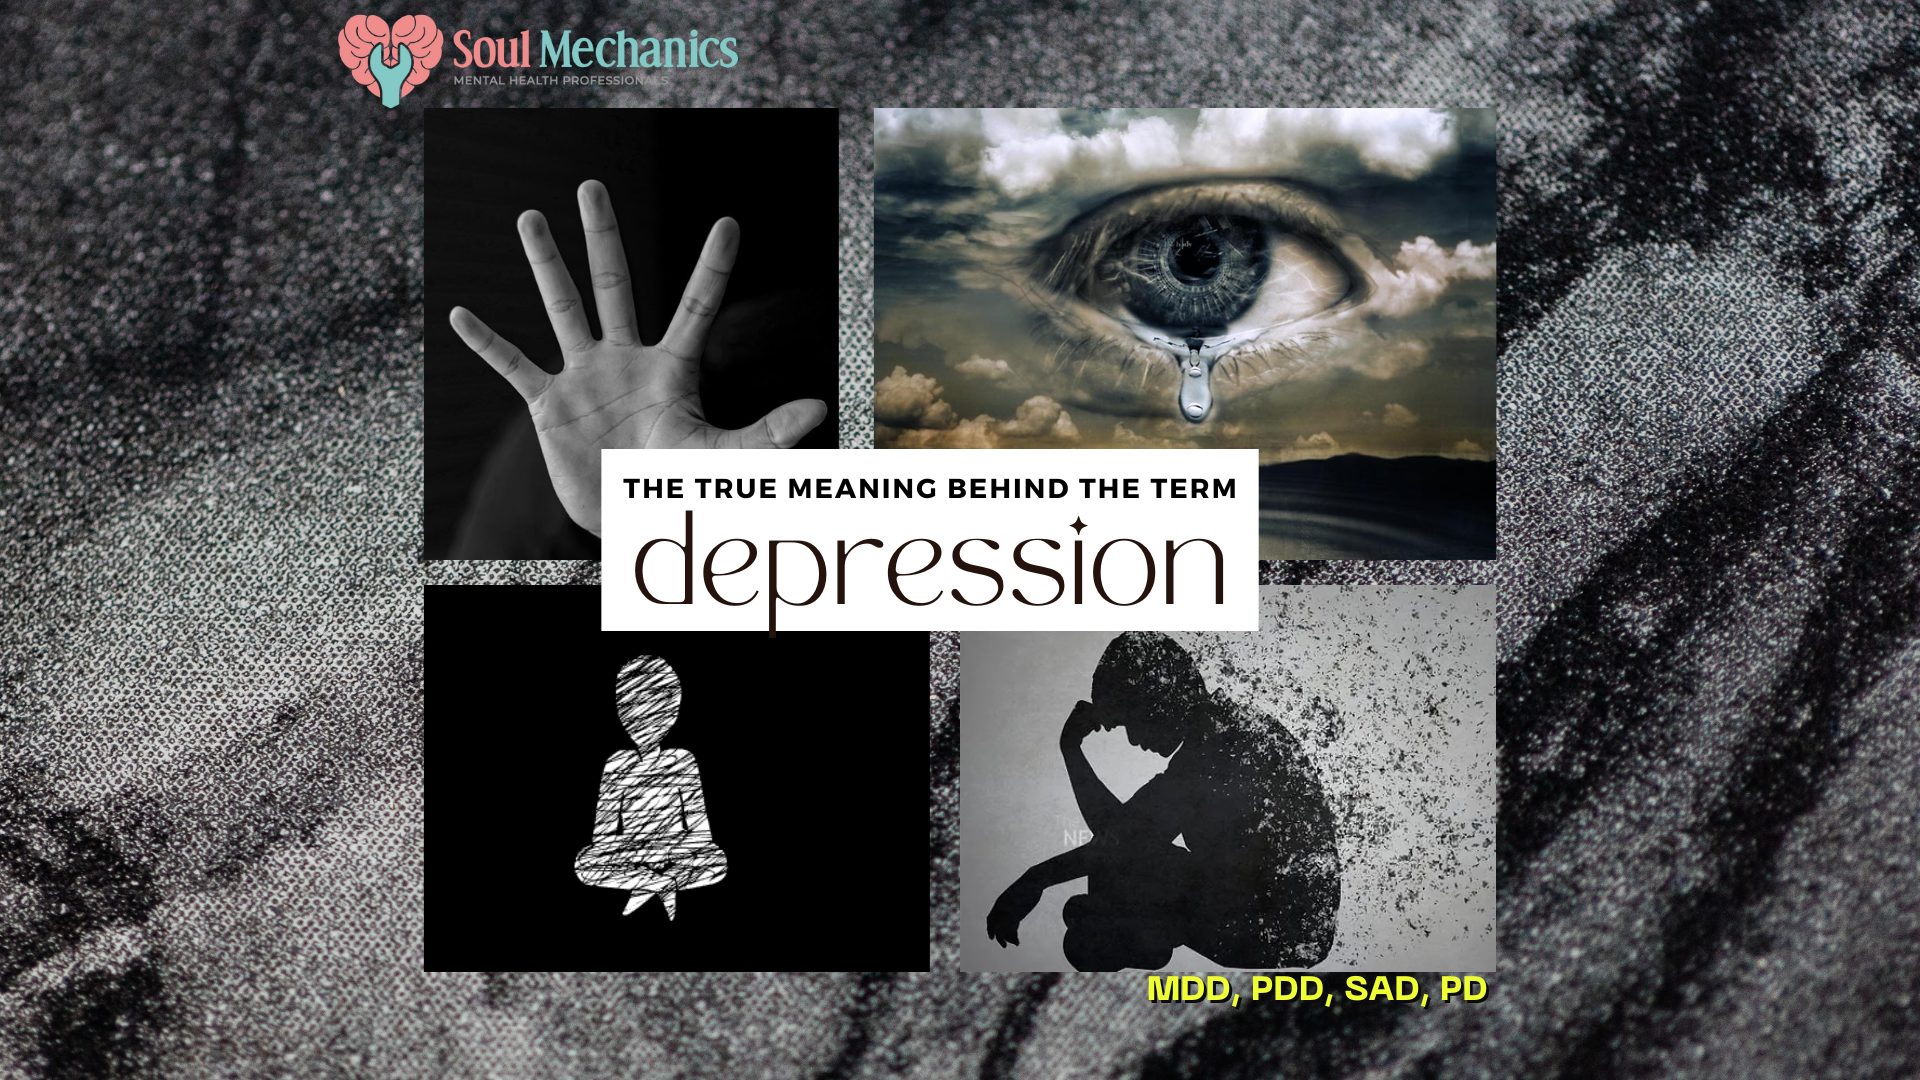 Is Depression overated?